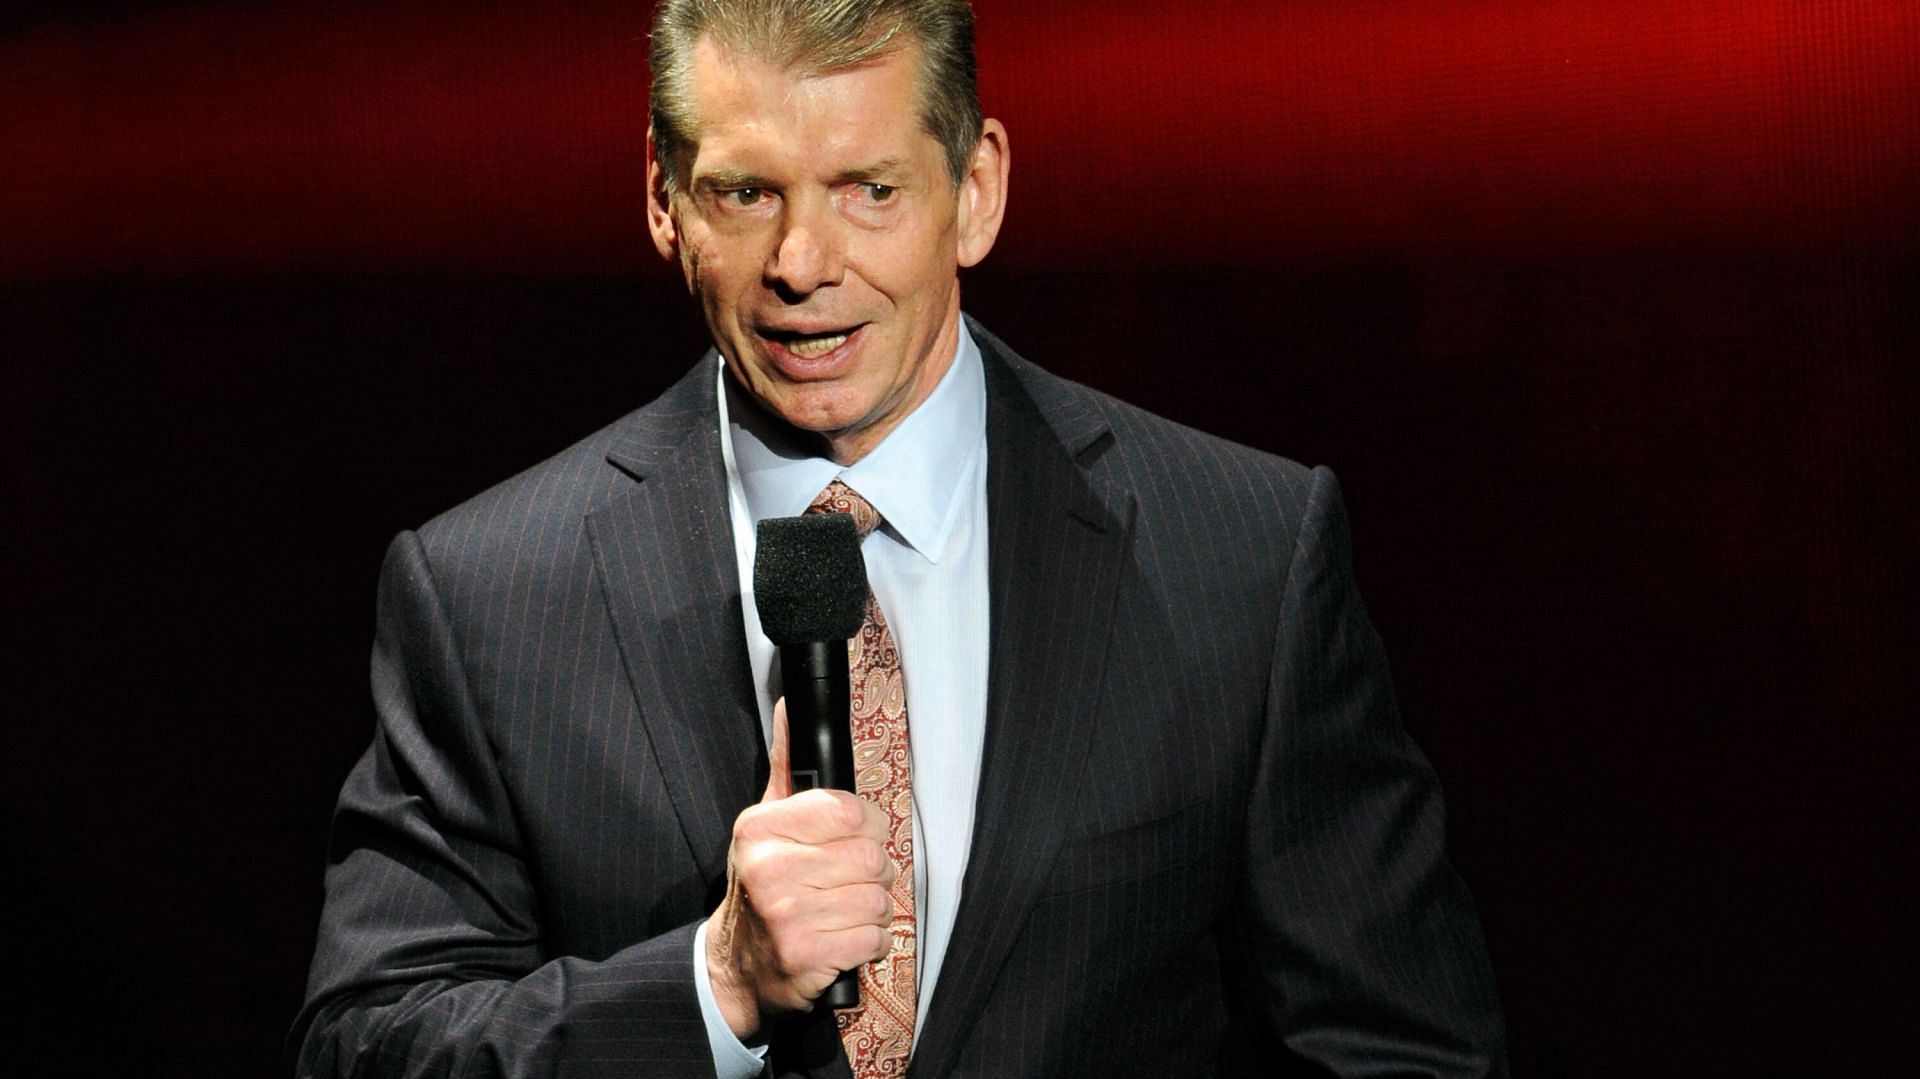 Vince McMahon has retired from WWE E